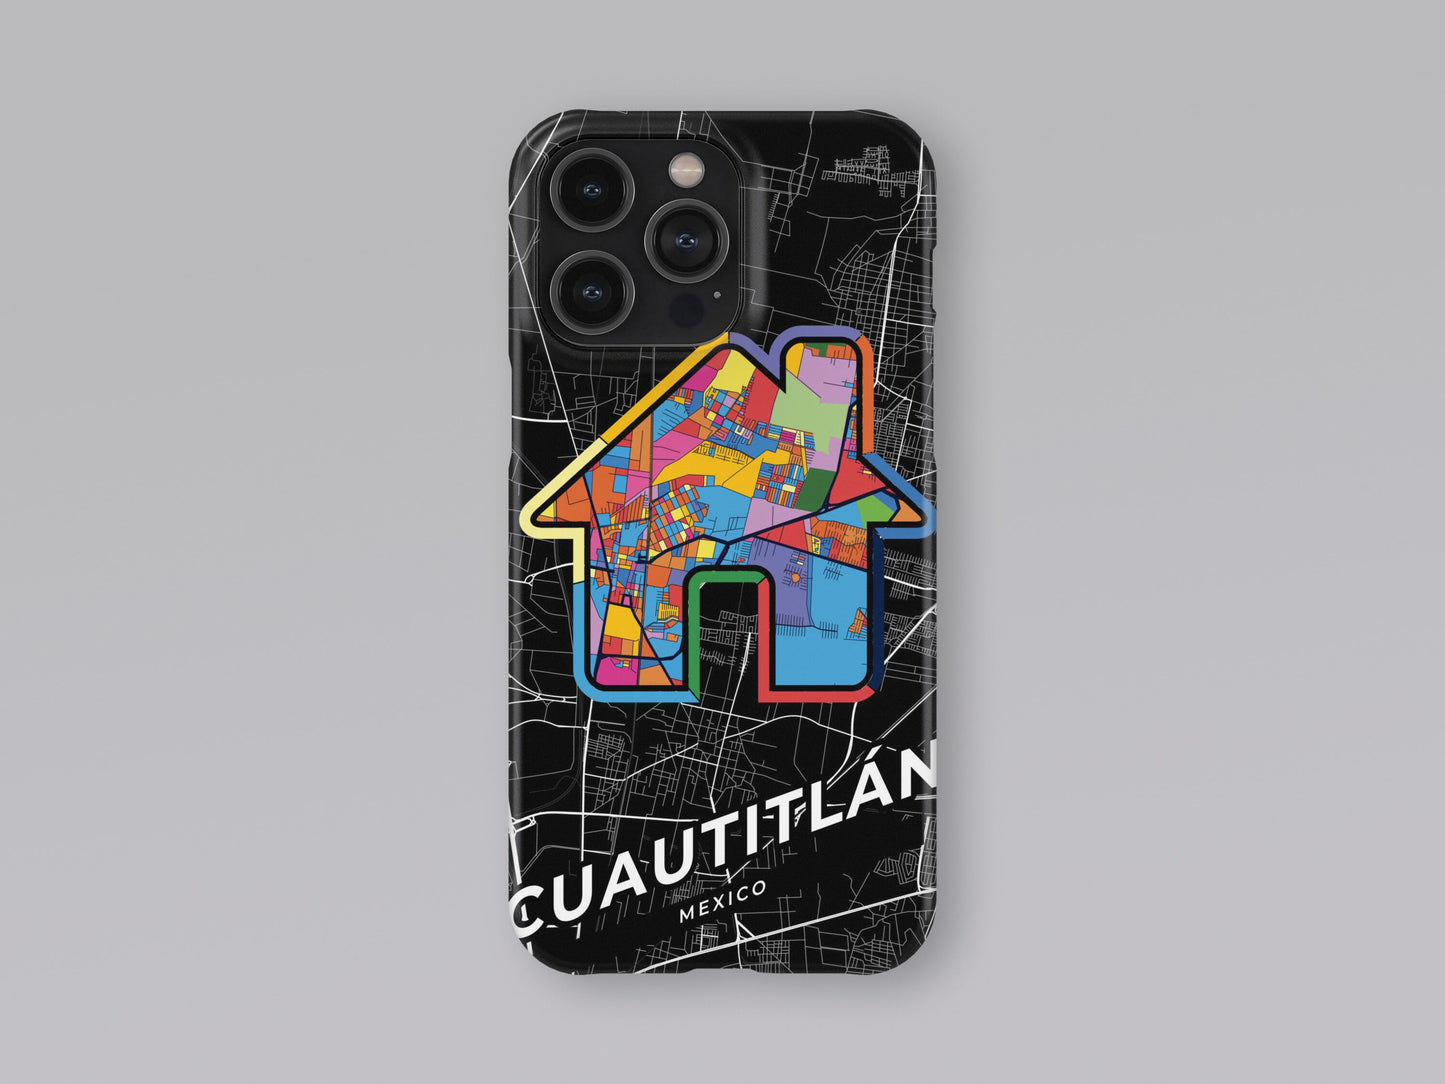 Cuautitlán Mexico slim phone case with colorful icon. Birthday, wedding or housewarming gift. Couple match cases. 3